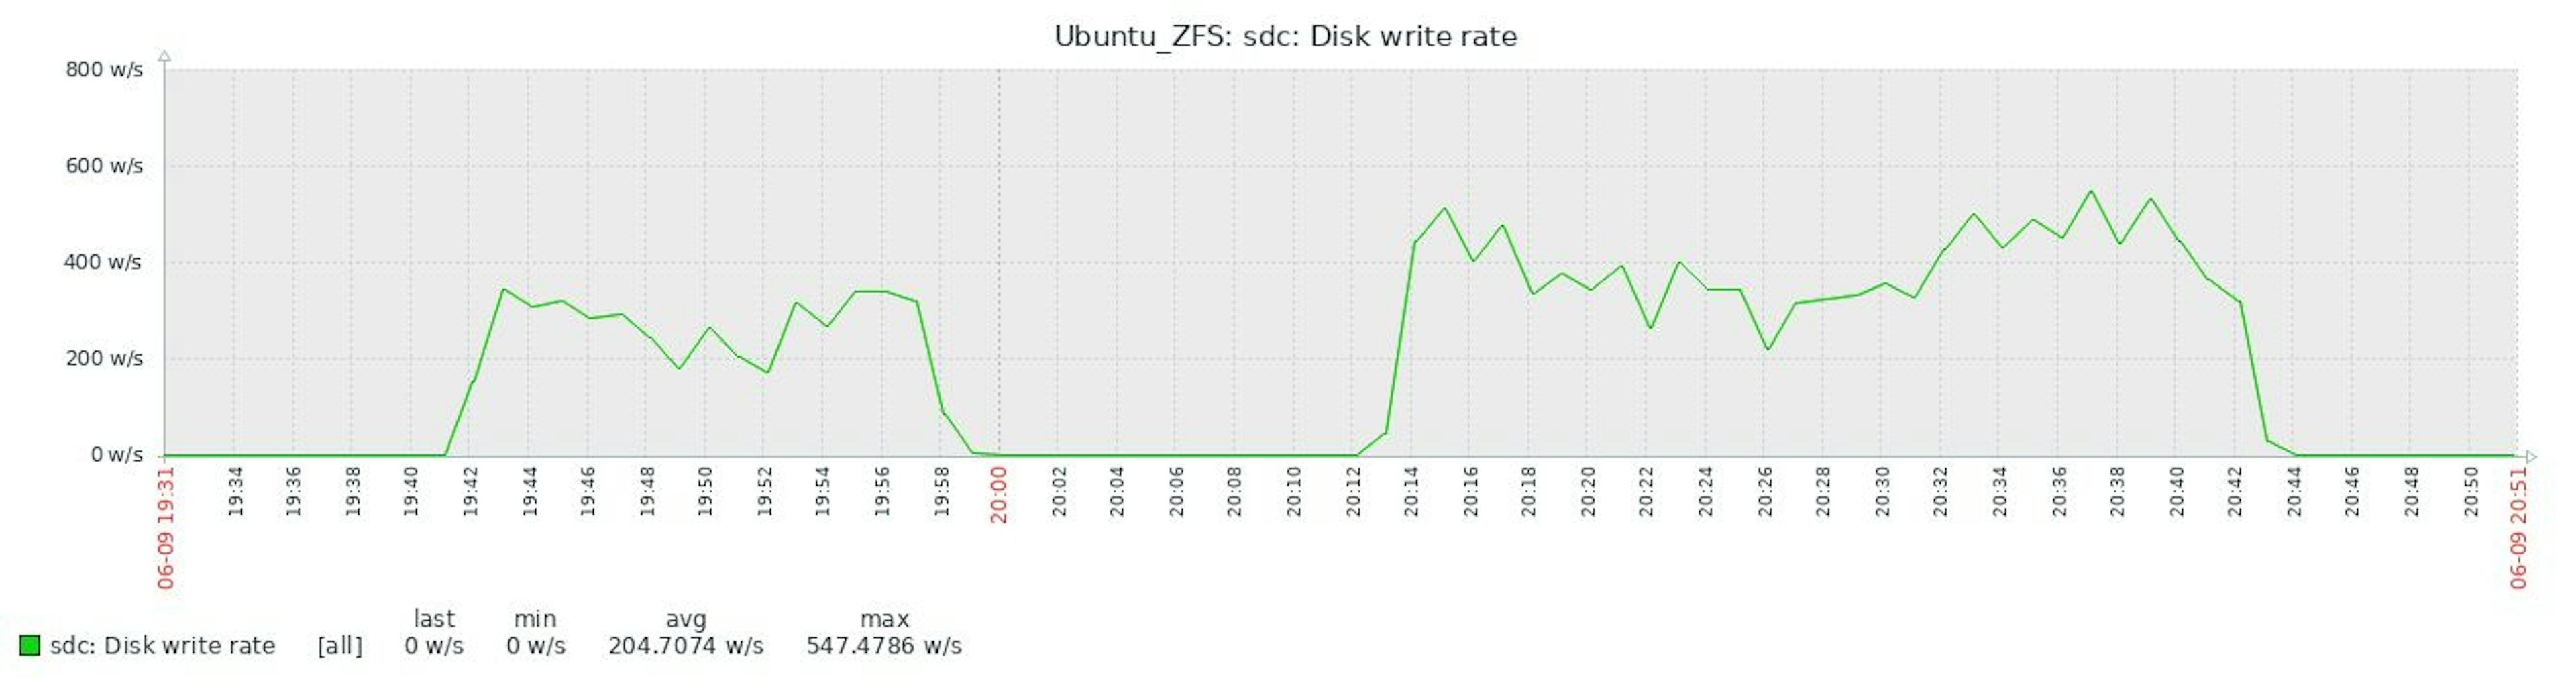 1.7.2 ZFS sdc disk write rate full